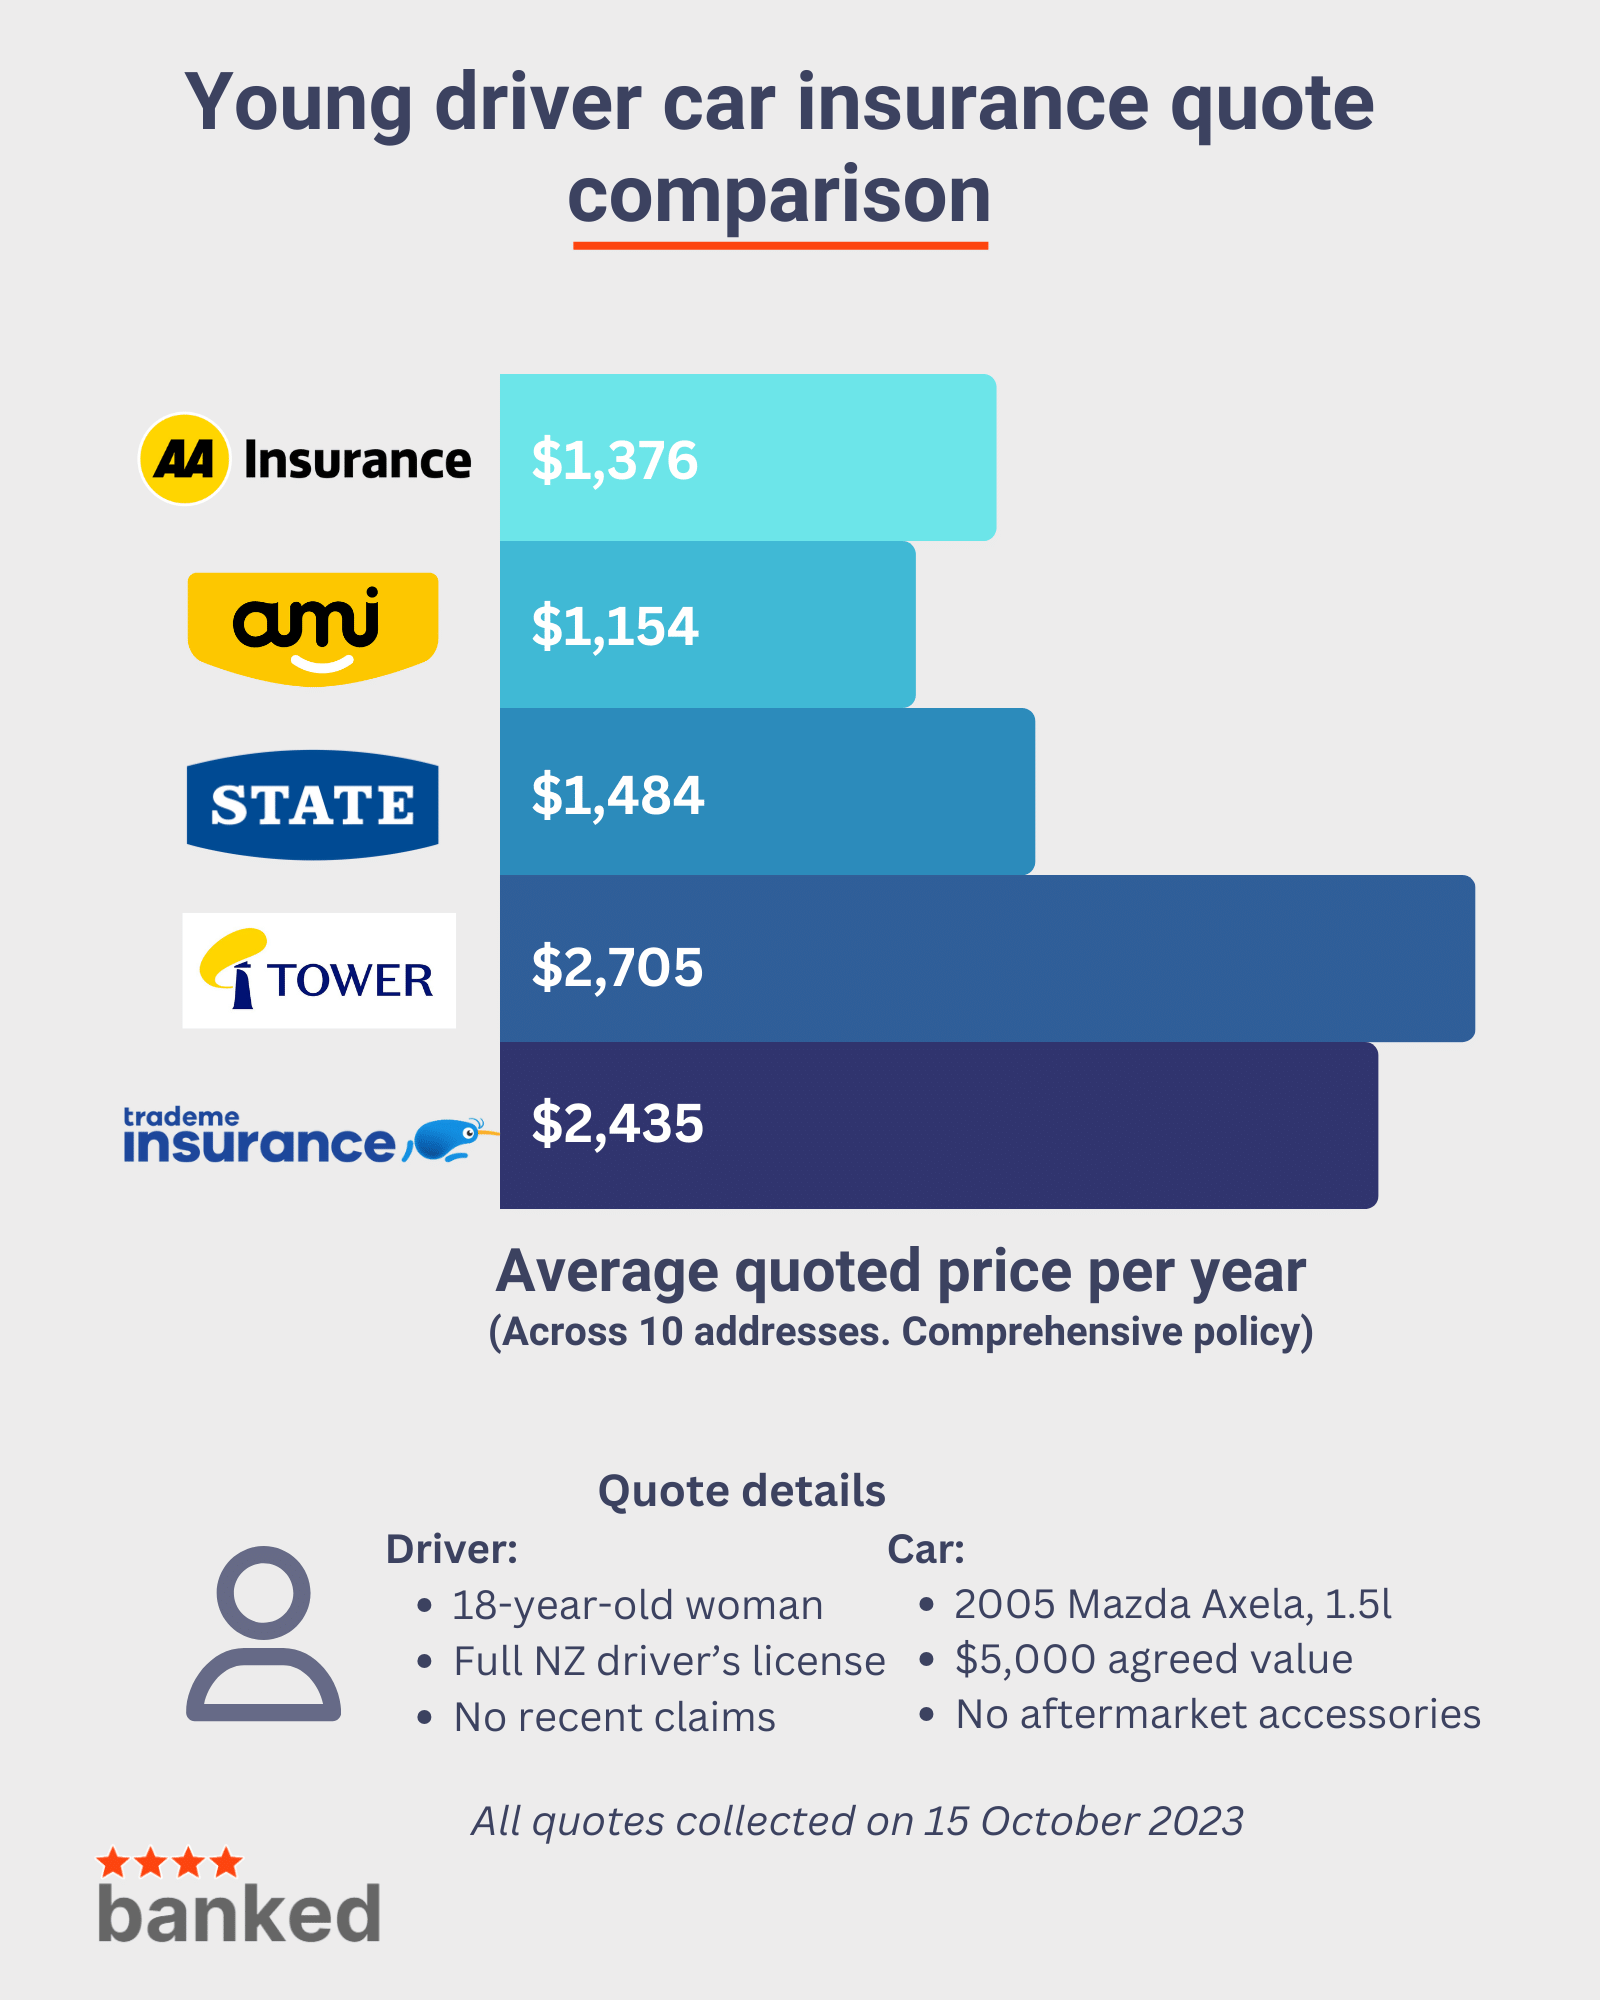 A car insurance quote comparison for young drivers.